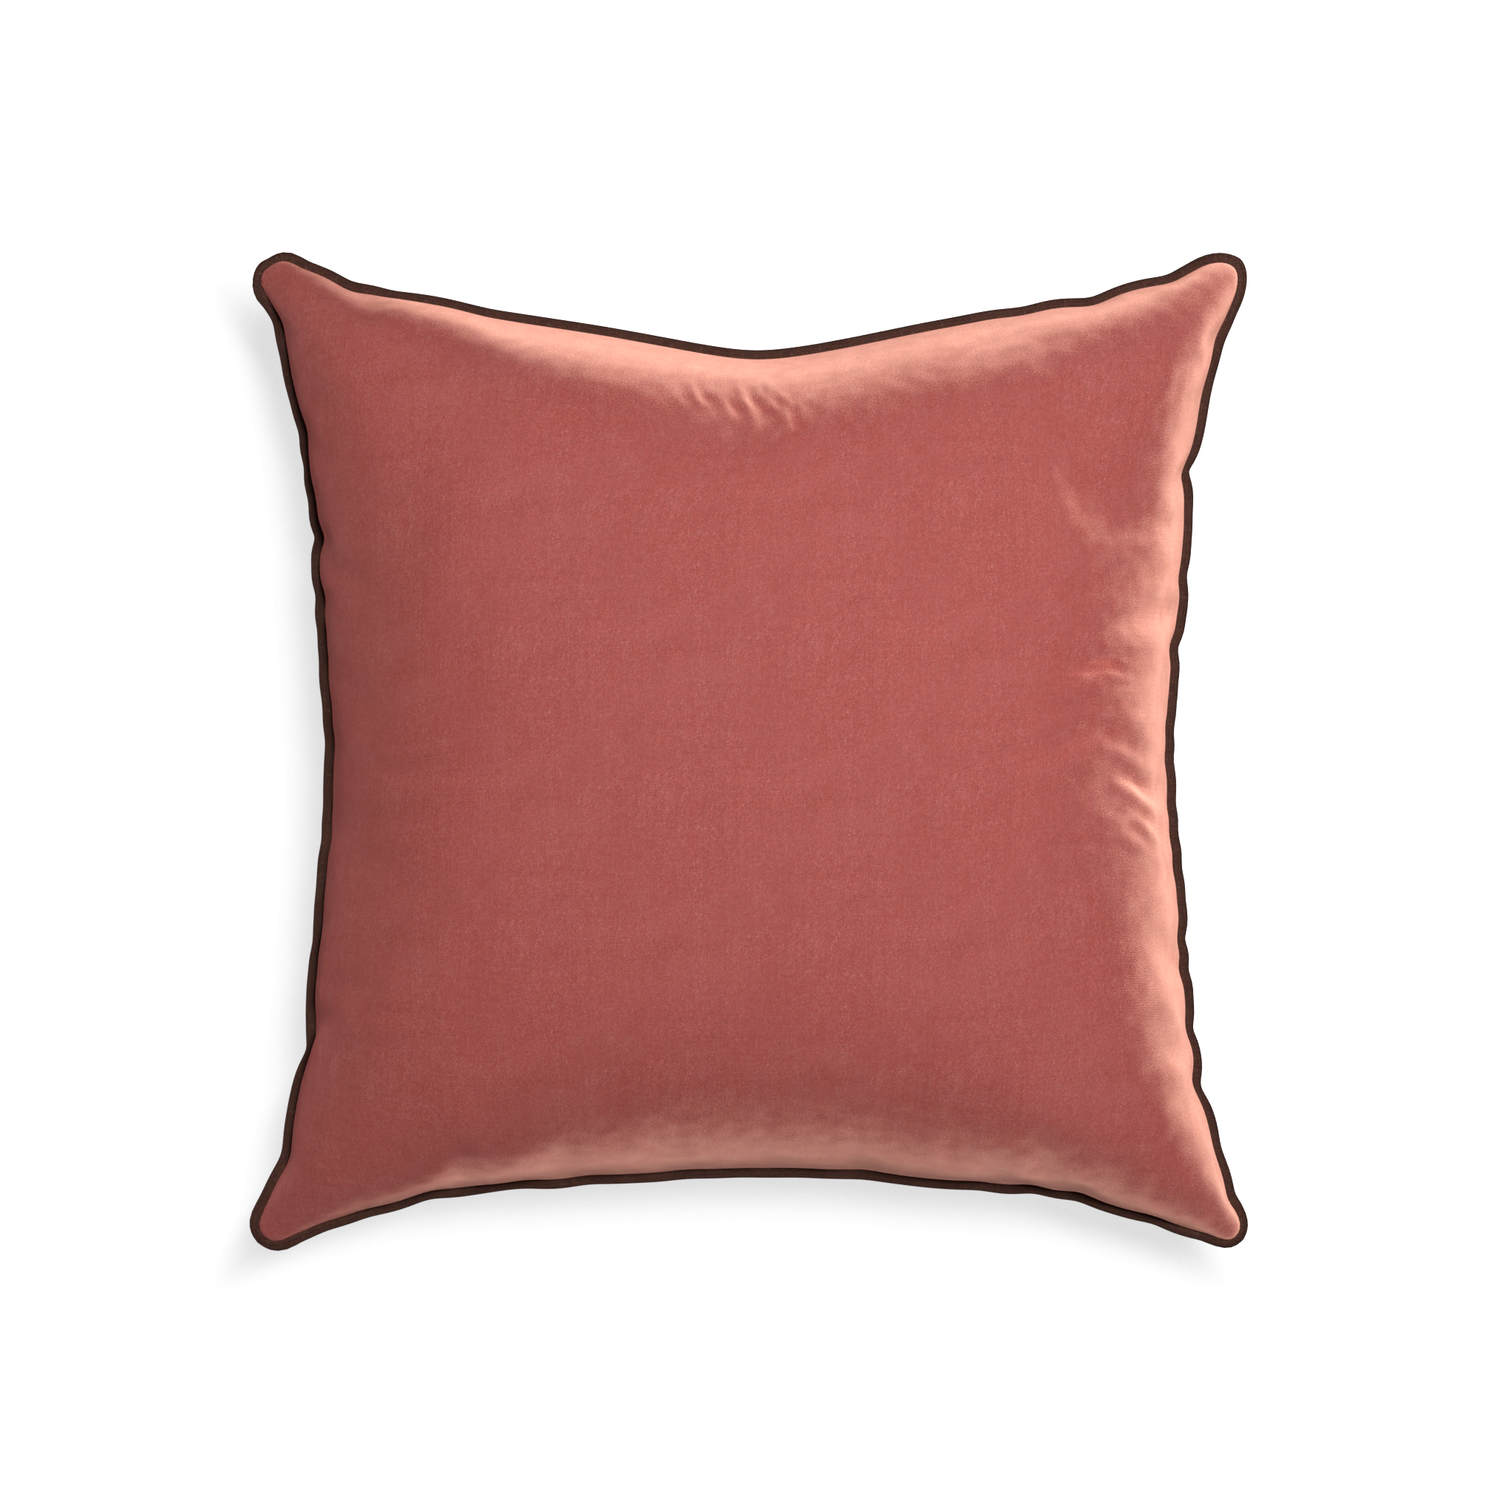 22-square cosmo velvet custom pillow with w piping on white background